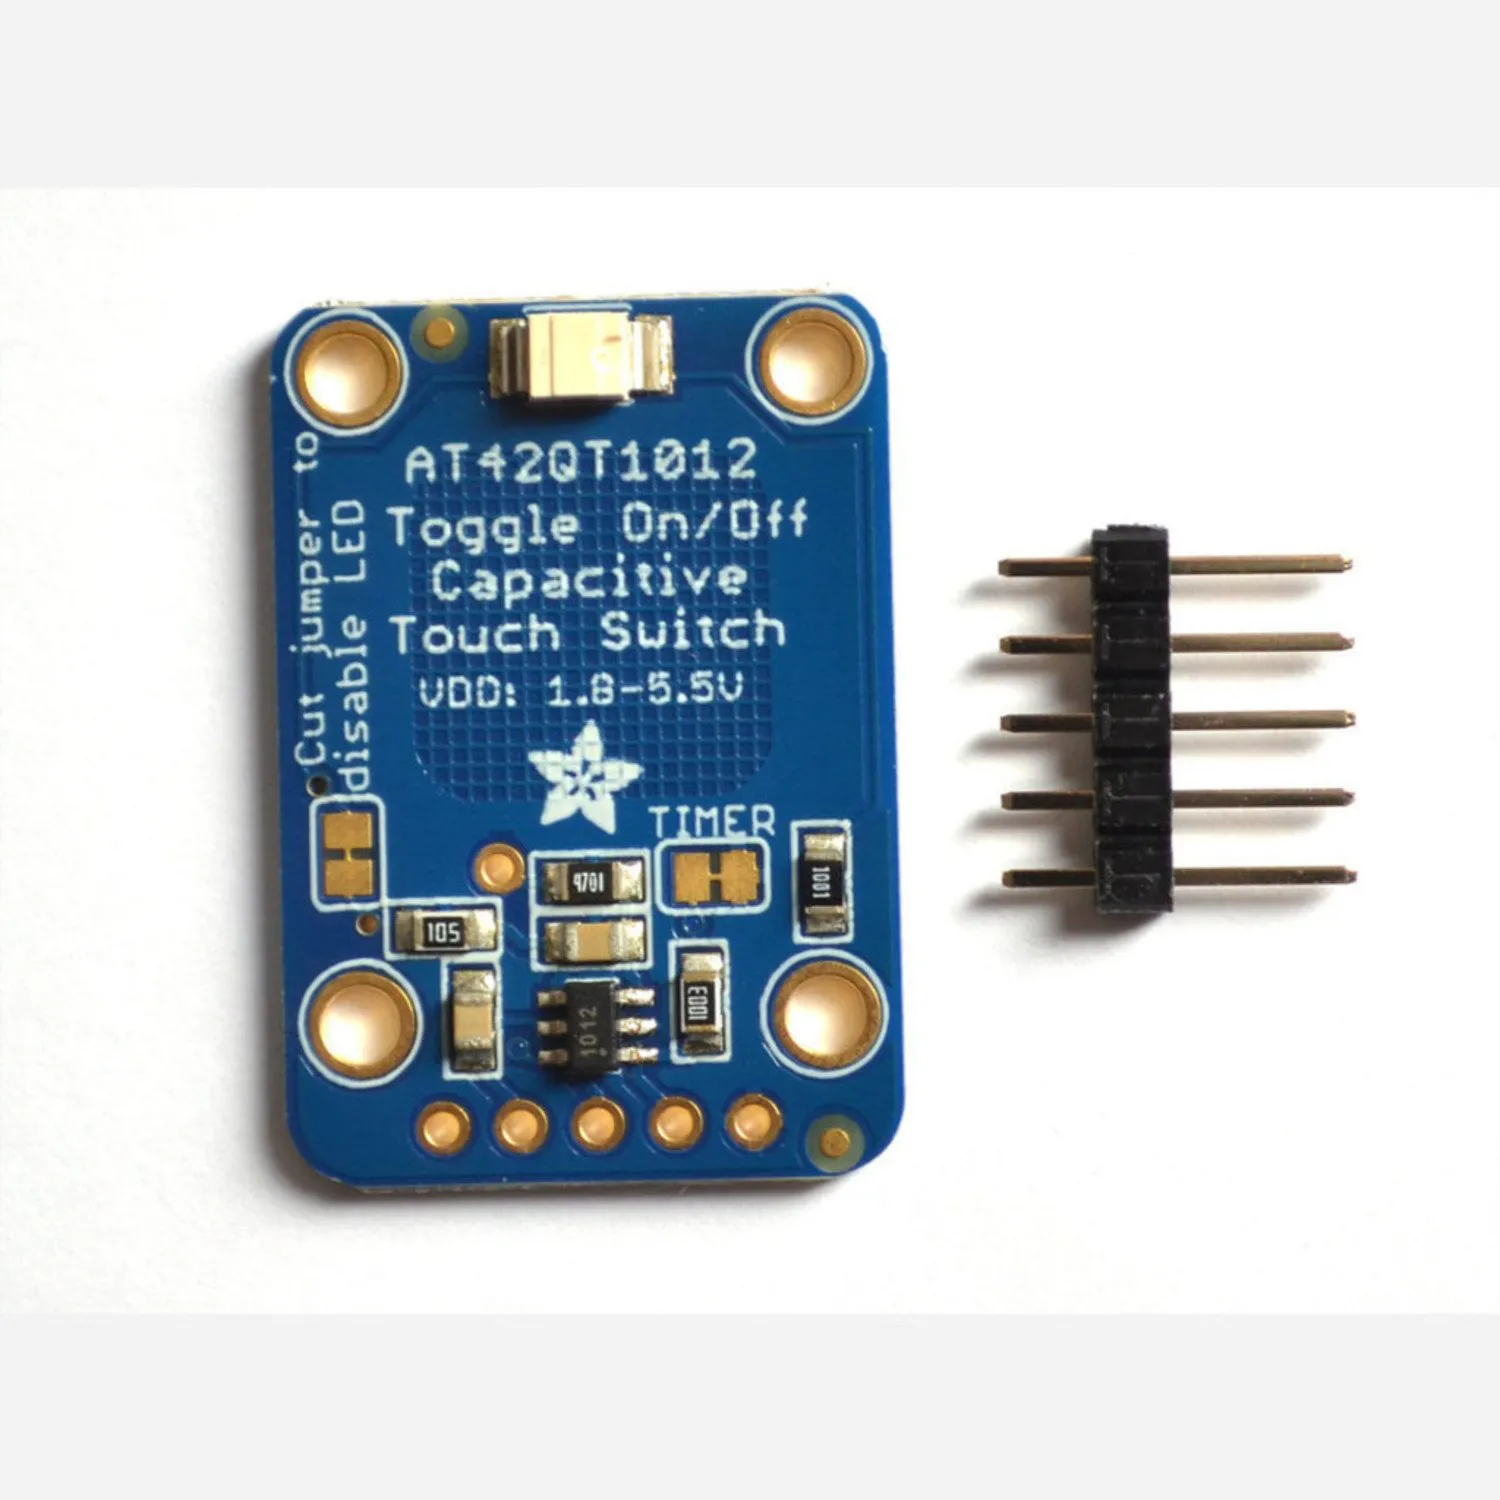 Photo of Standalone Toggle Capacitive Touch Sensor Breakout [AT42QT1012]